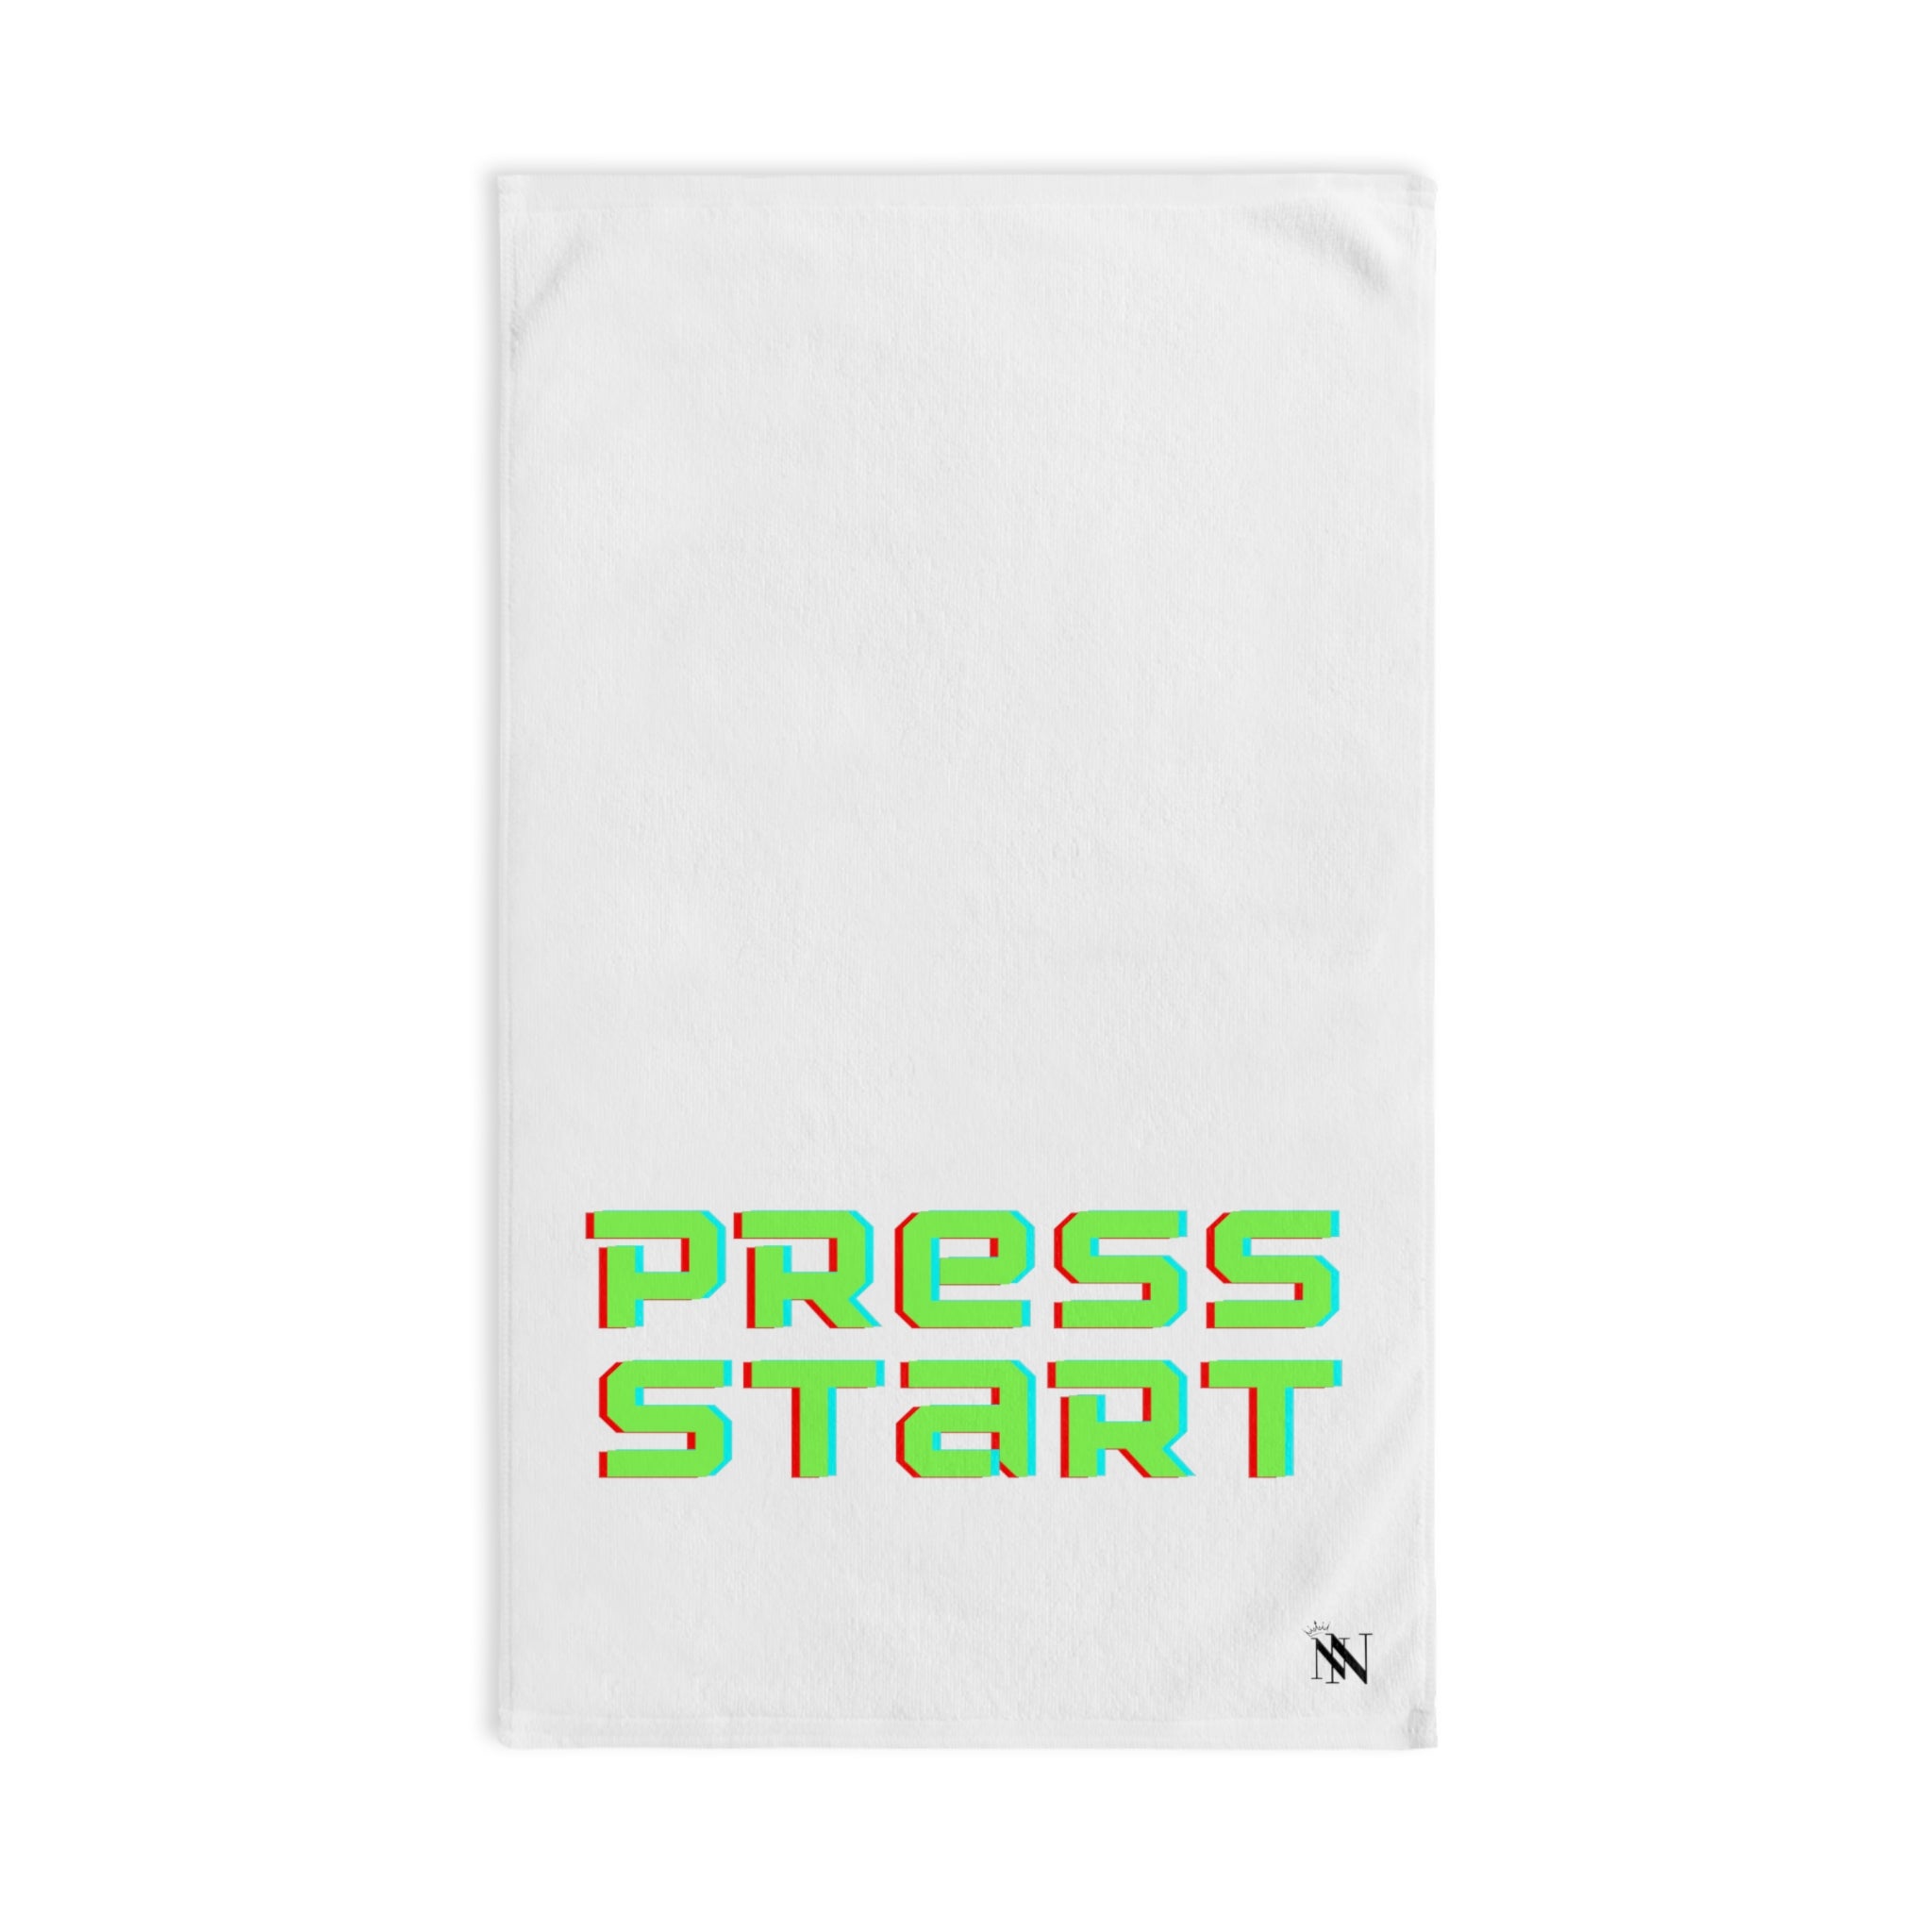 Press Start White | Funny Gifts for Men - Gifts for Him - Birthday Gifts for Men, Him, Her, Husband, Boyfriend, Girlfriend, New Couple Gifts, Fathers & Valentines Day Gifts, Christmas Gifts NECTAR NAPKINS